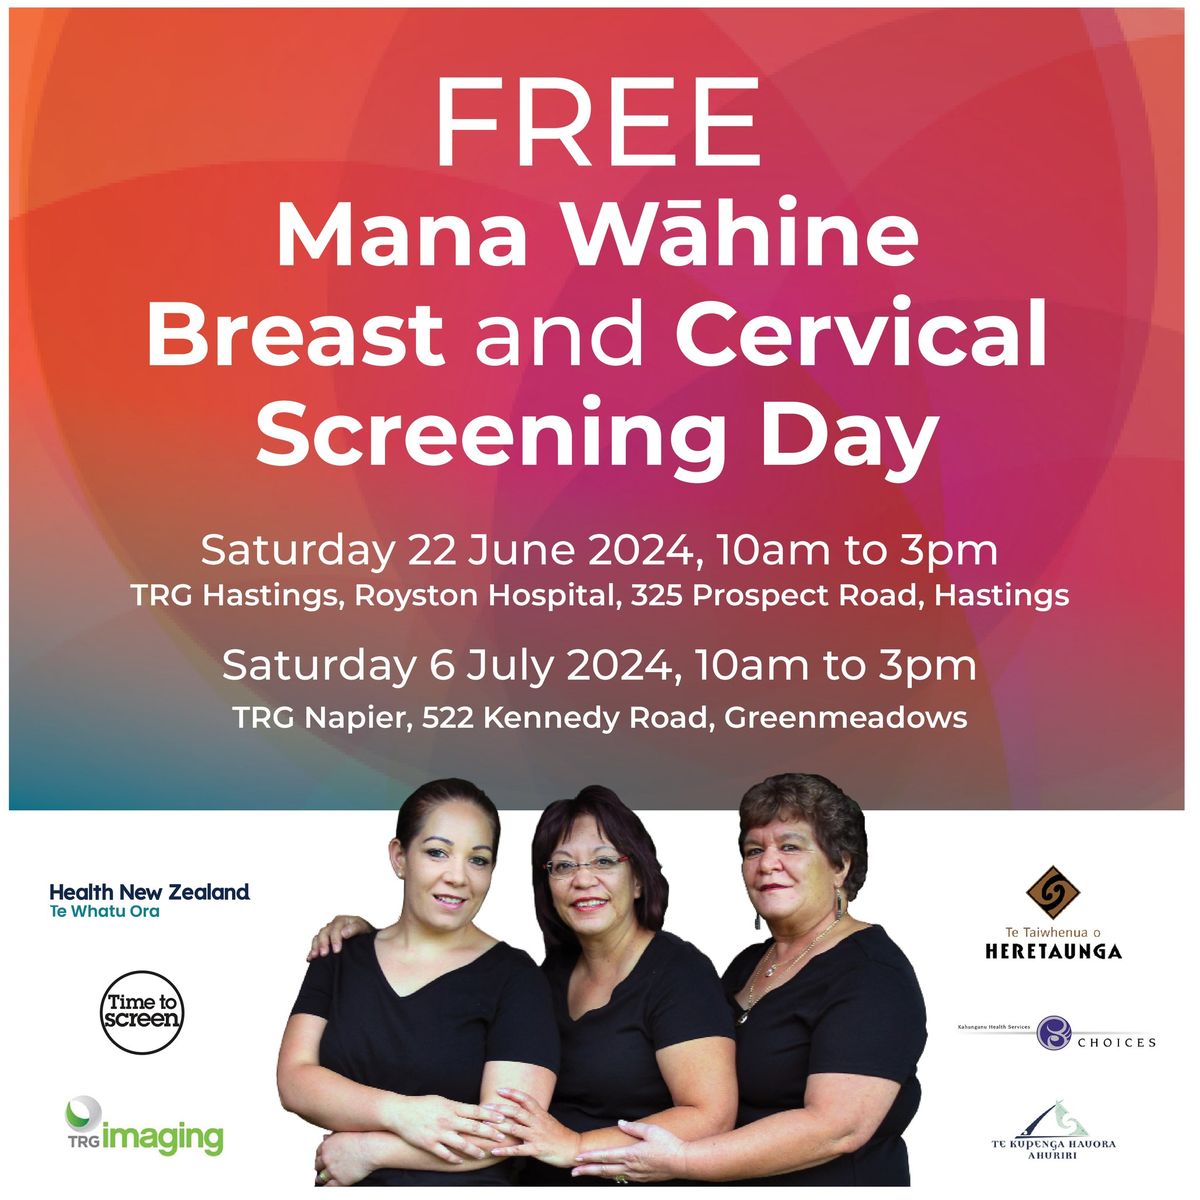 Free mana wahine breast and cervical screening day